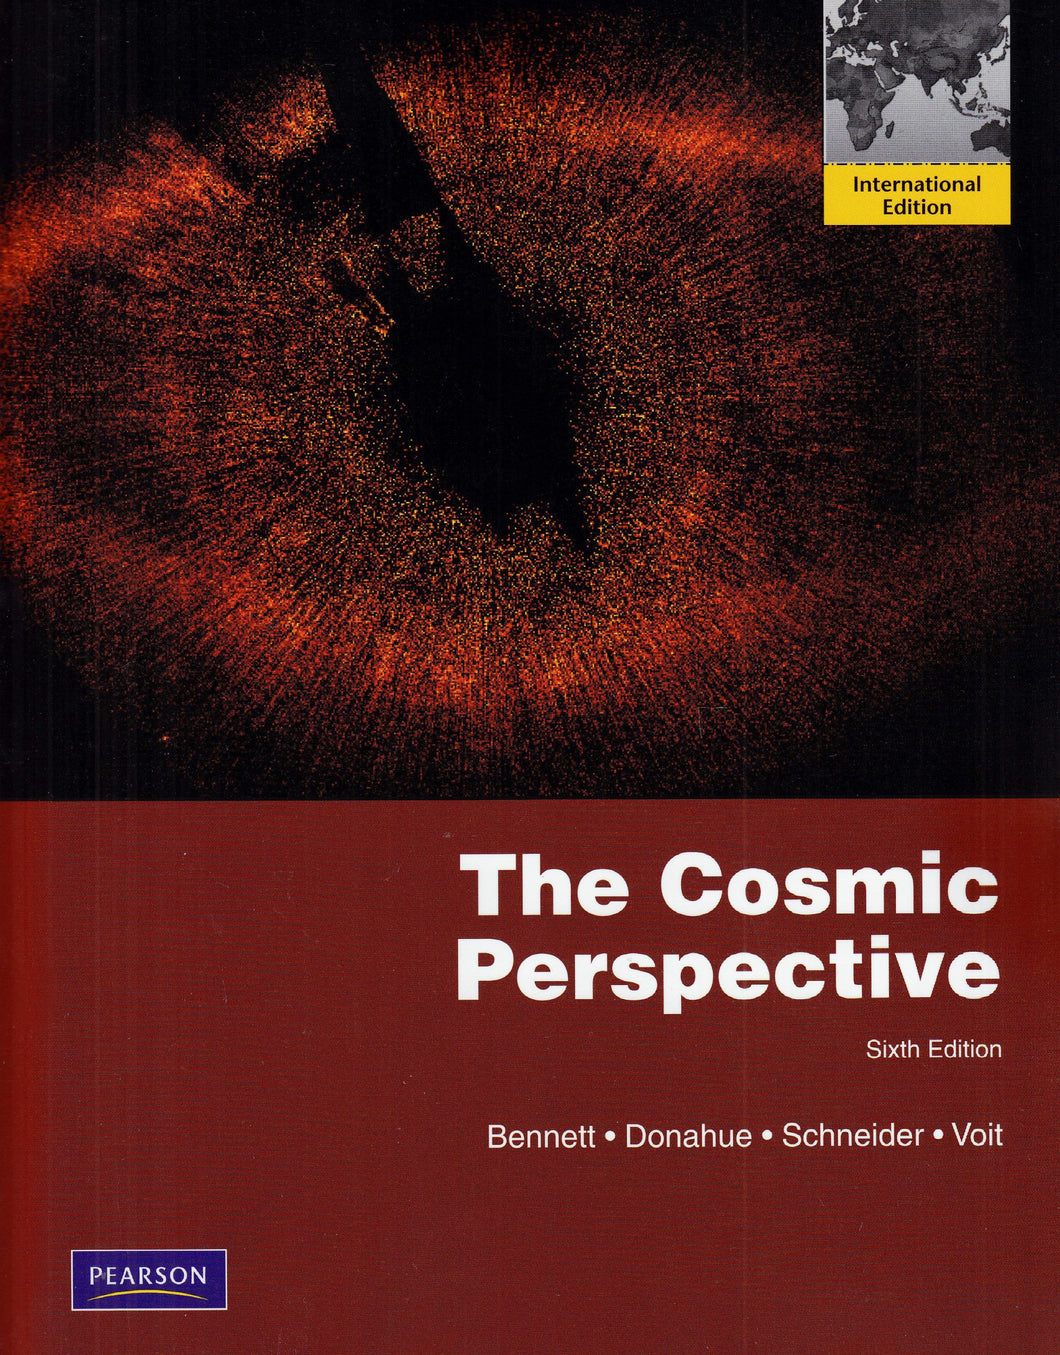 The Cosmic Perspective with Mastering Astronomy: International Edition [Paperback] 6e by Bennett